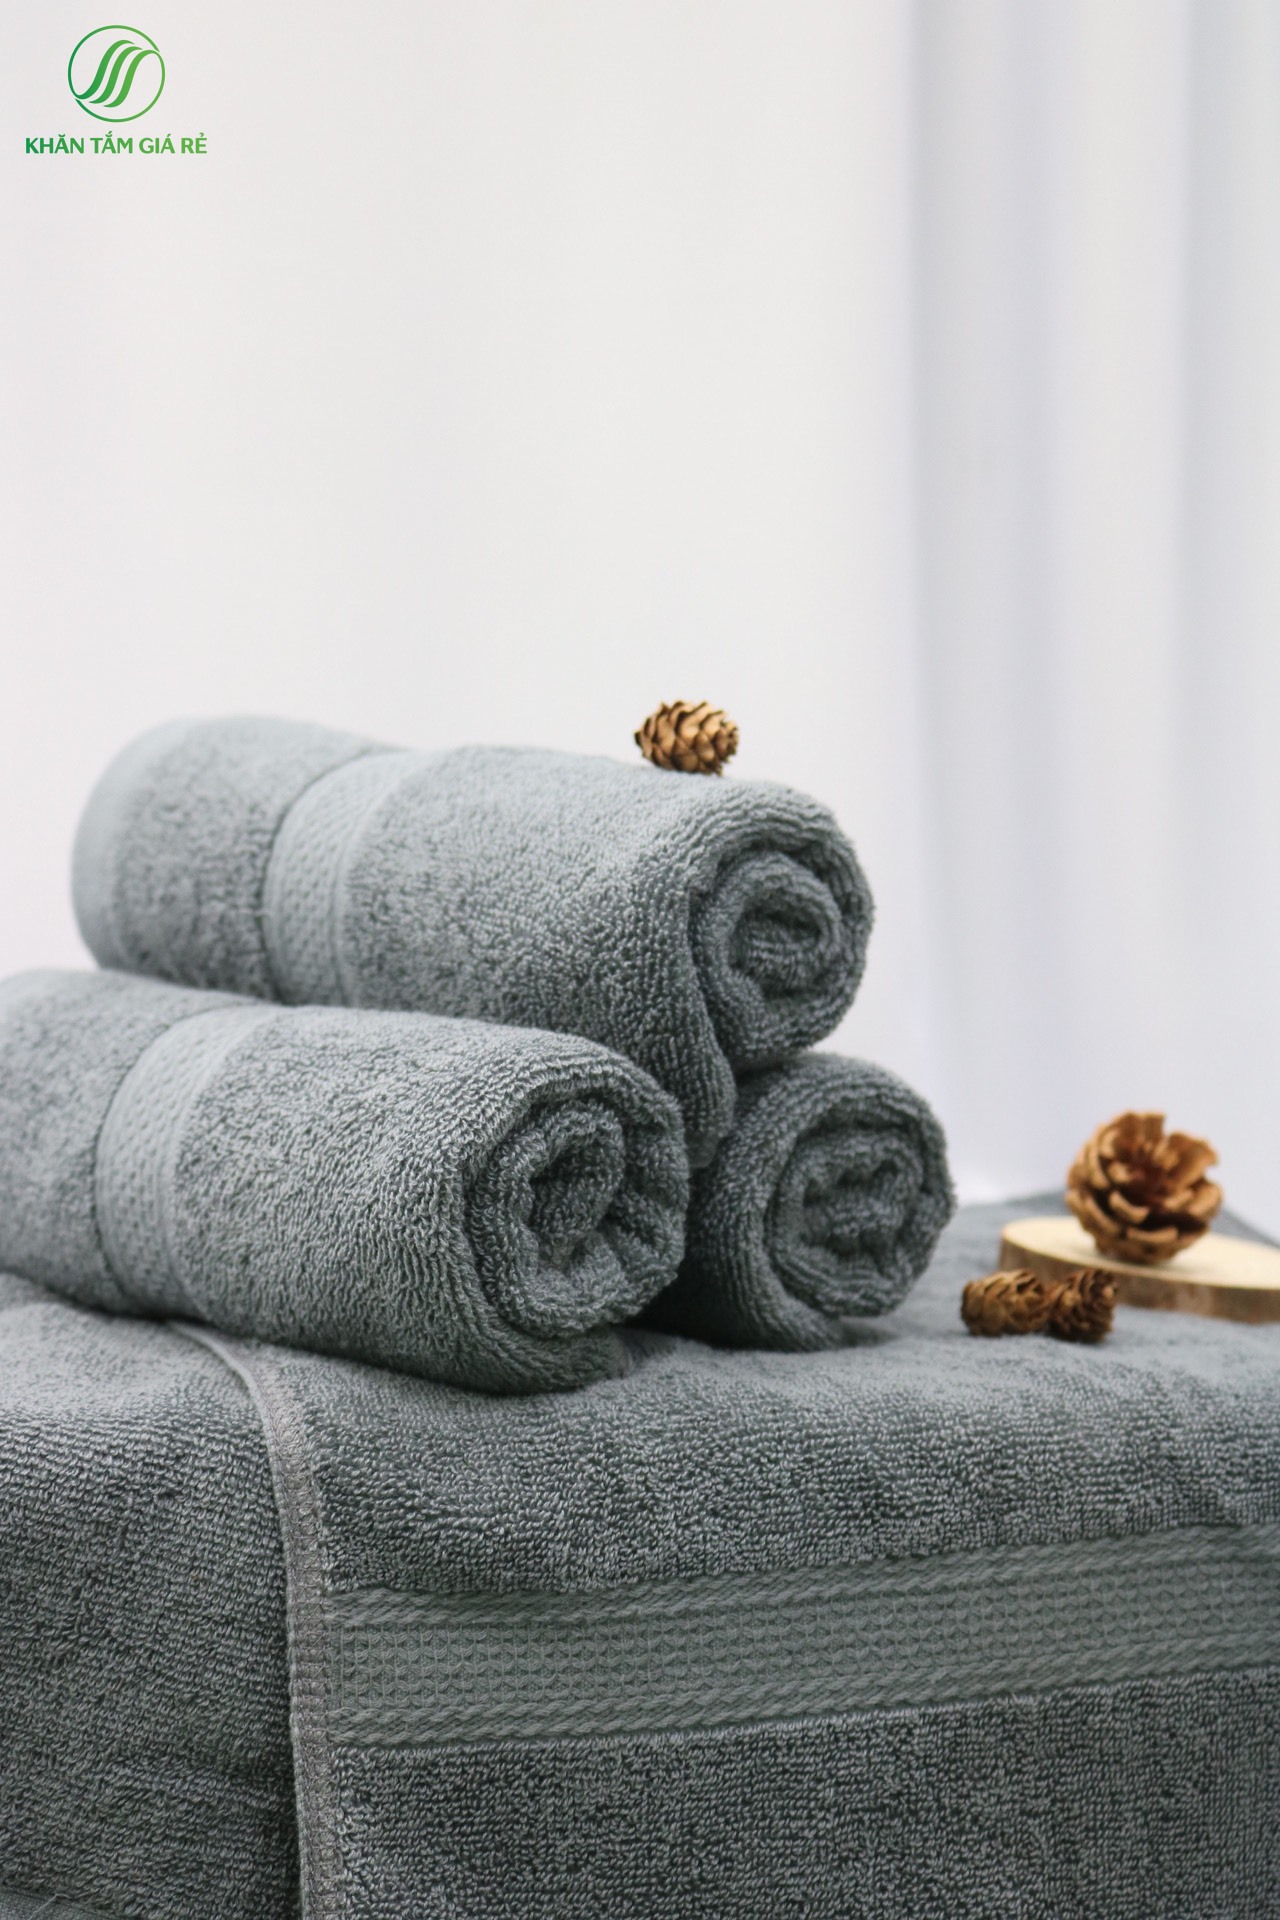 Towels Cheap is the Top leading brand in the field of providing quality scarf